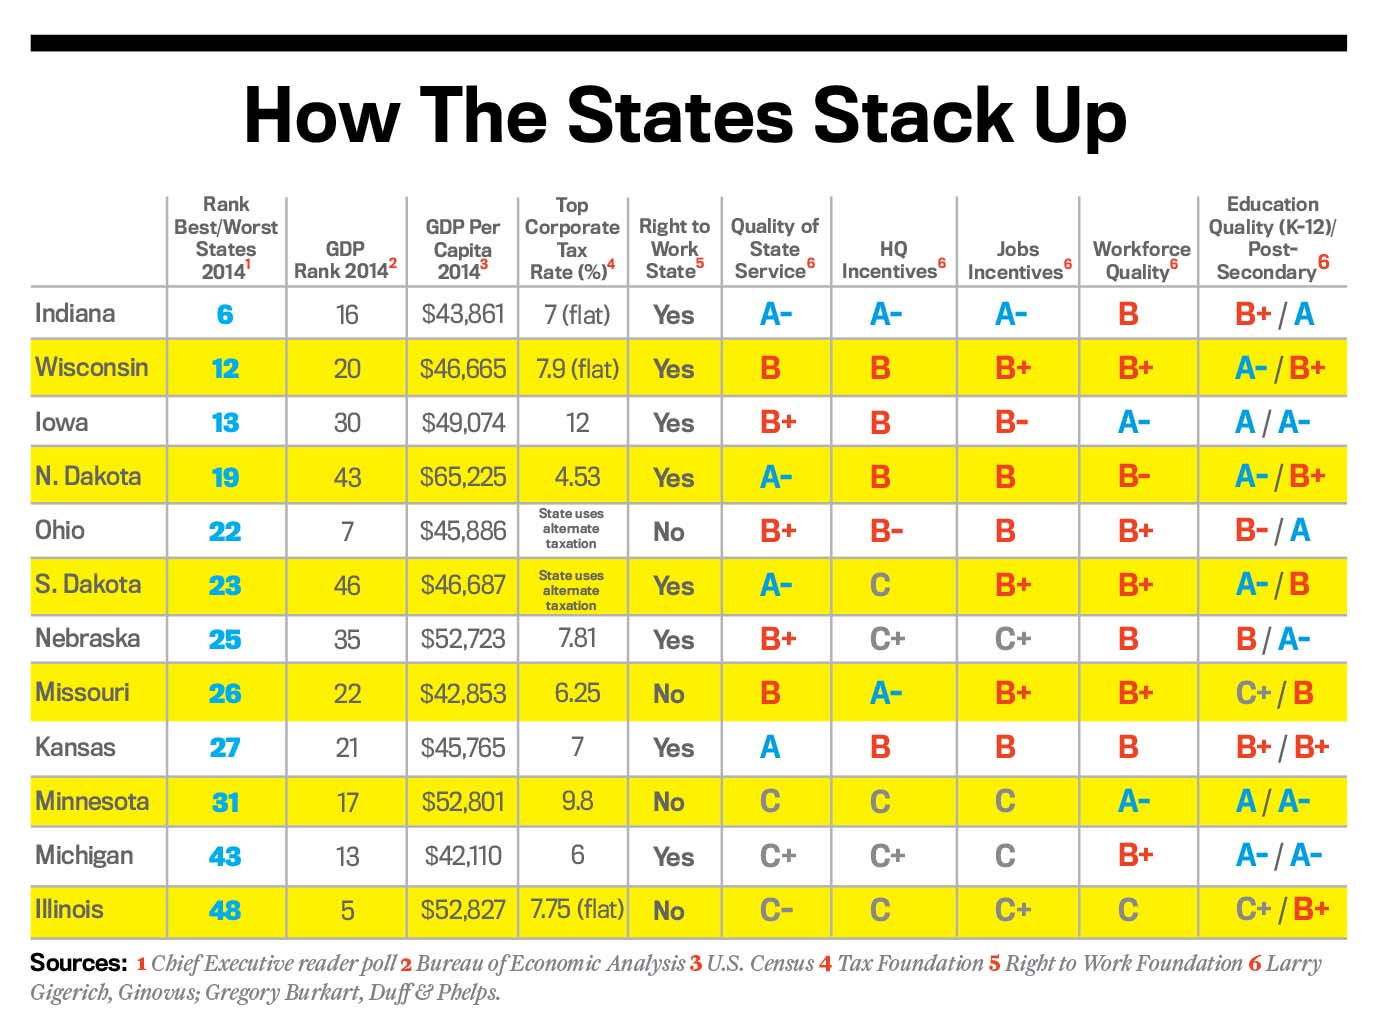 How the States Stack Up